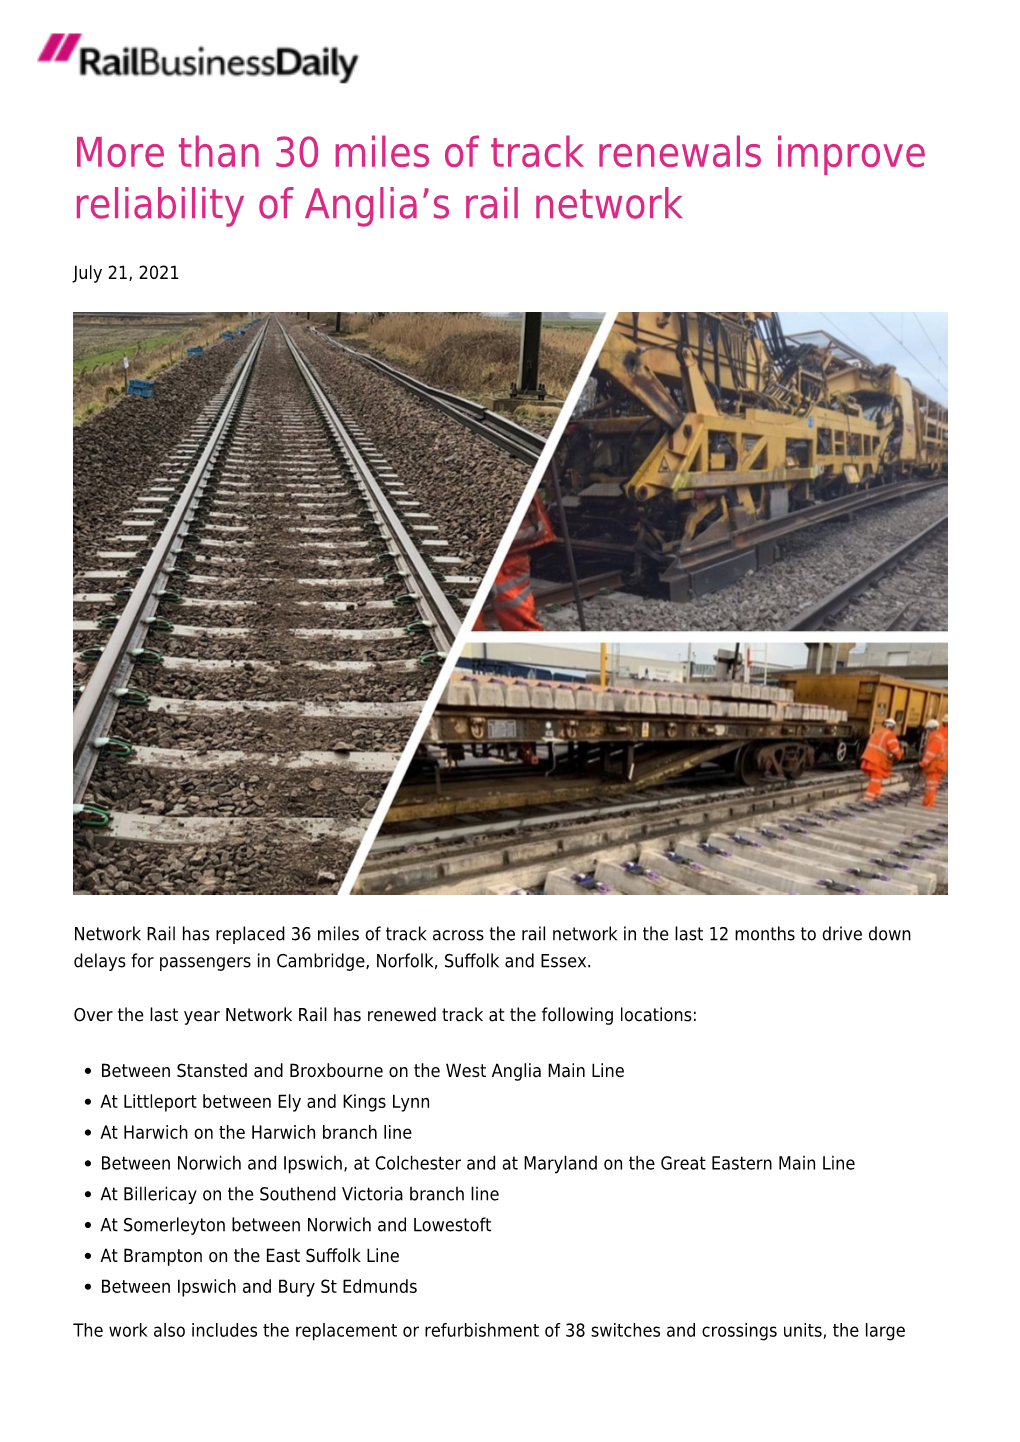 More Than 30 Miles of Track Renewals Improve Reliability of Anglia’S Rail Network